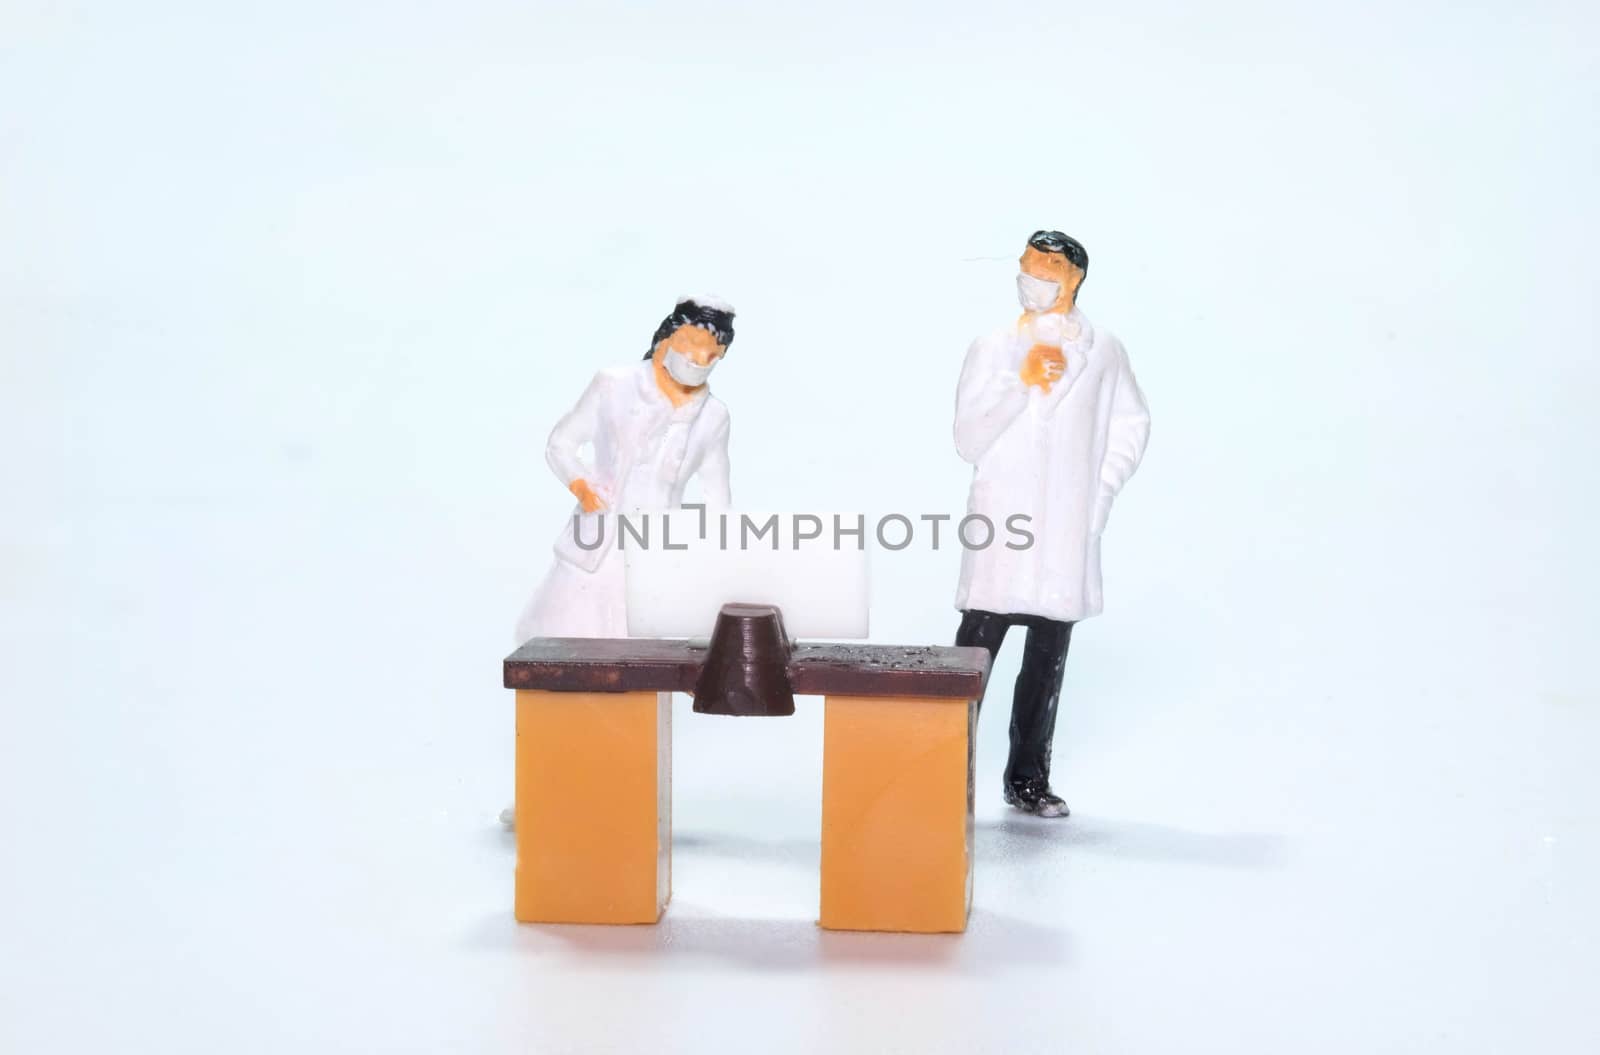 the miniature figure doll doctor and nurse wearing mask looking at display screen in disease Control point to scan Coronavirus or Covid-19